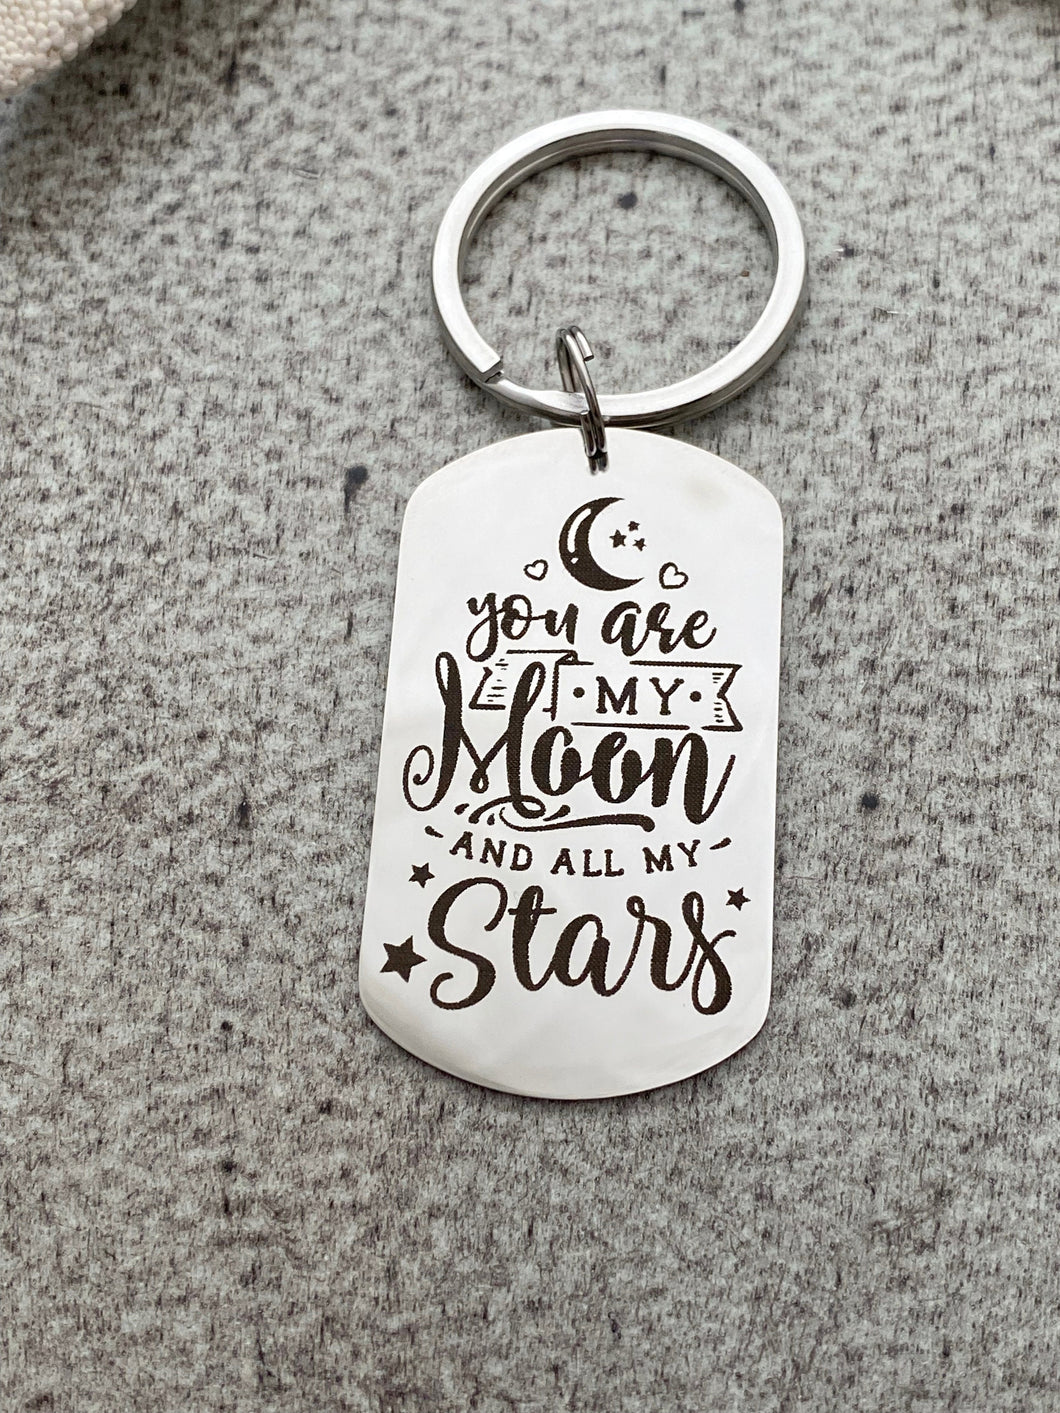 you are my moon and all my stars - celestial keychain - engraved keychain -  gift for boyfriend husband Valentine's Day